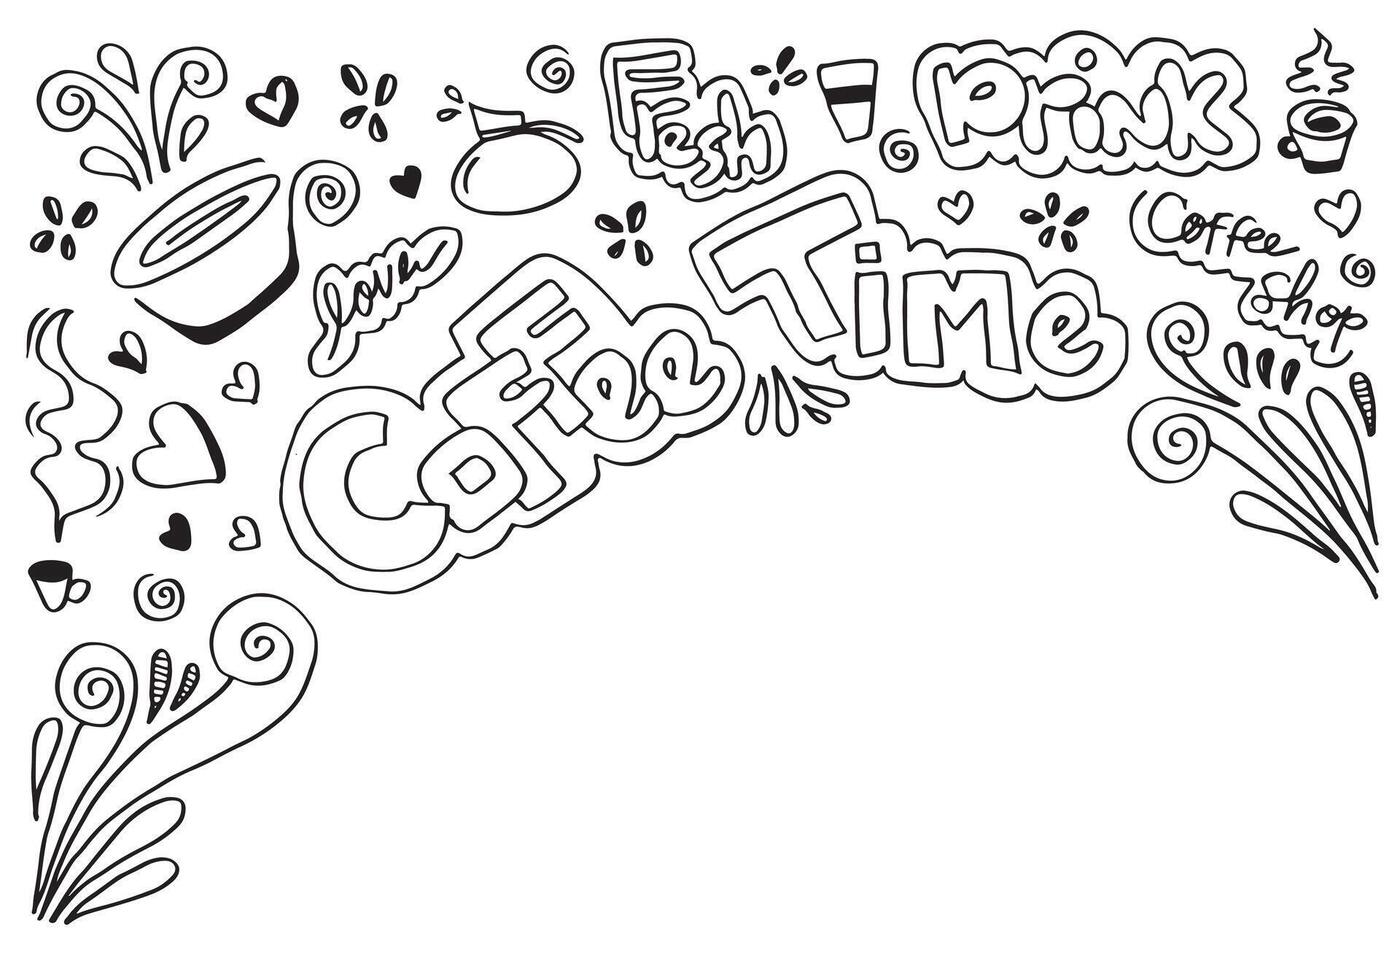 Coffee time poster concept with coffee cup and lettering.doodle illustration vector